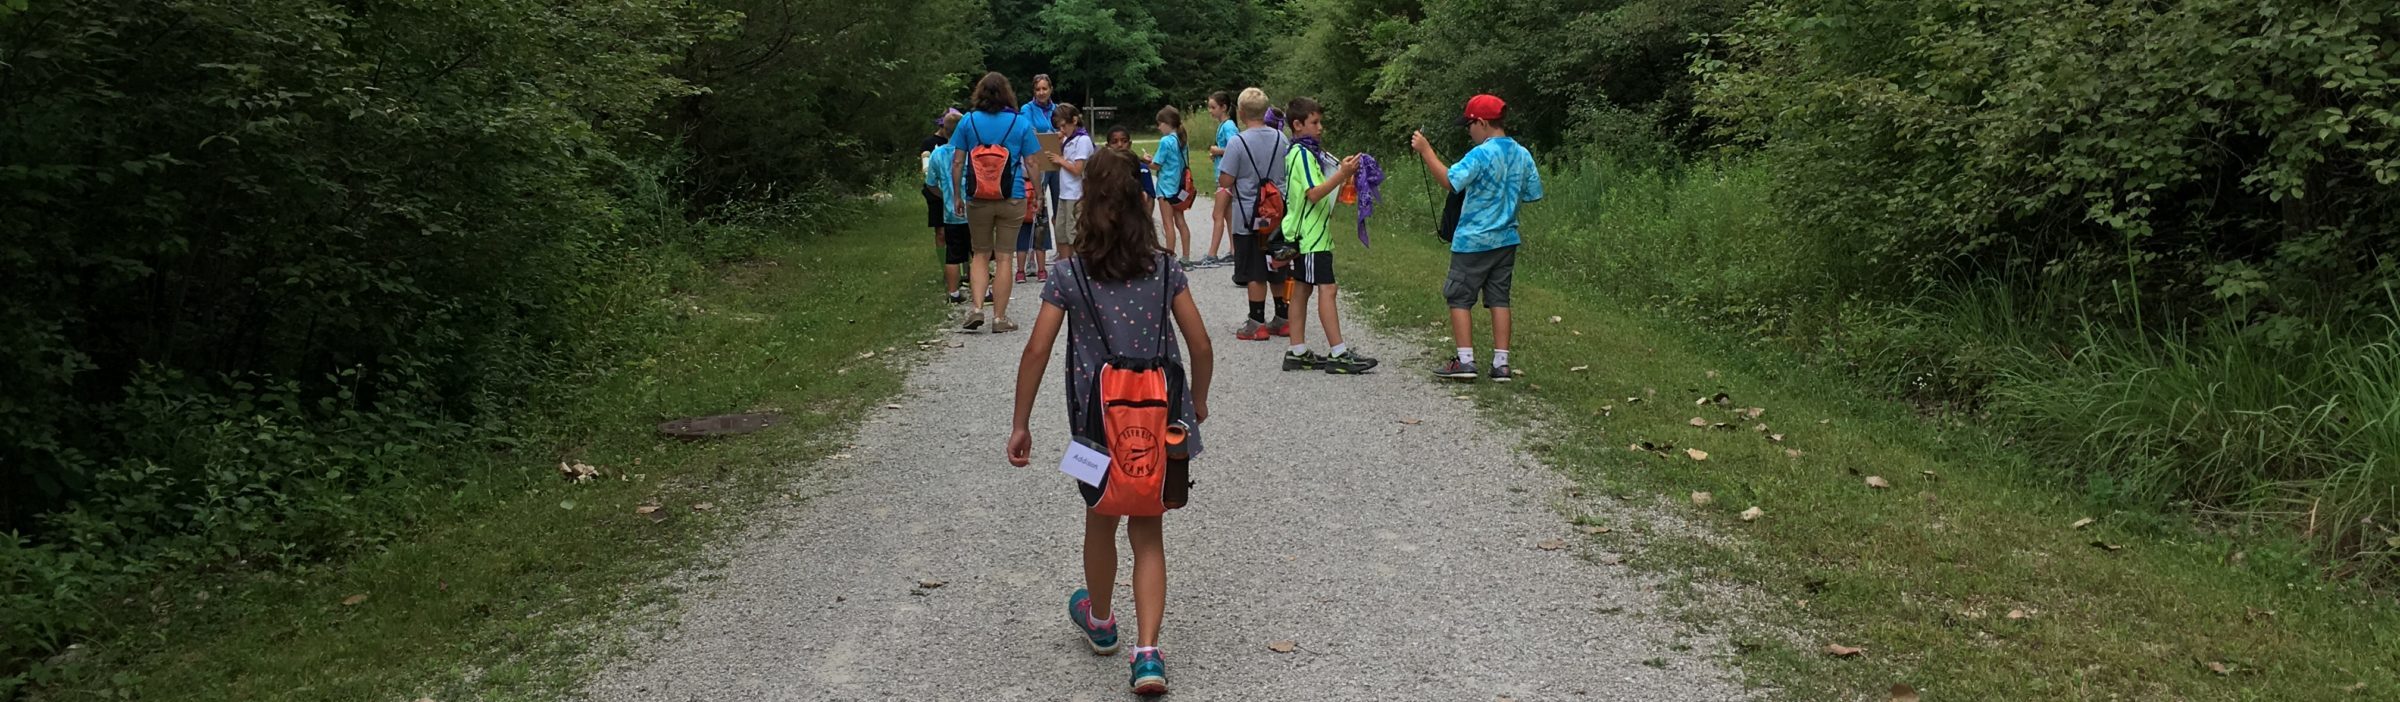 A group of campers exploring the green-treed Nature Park.